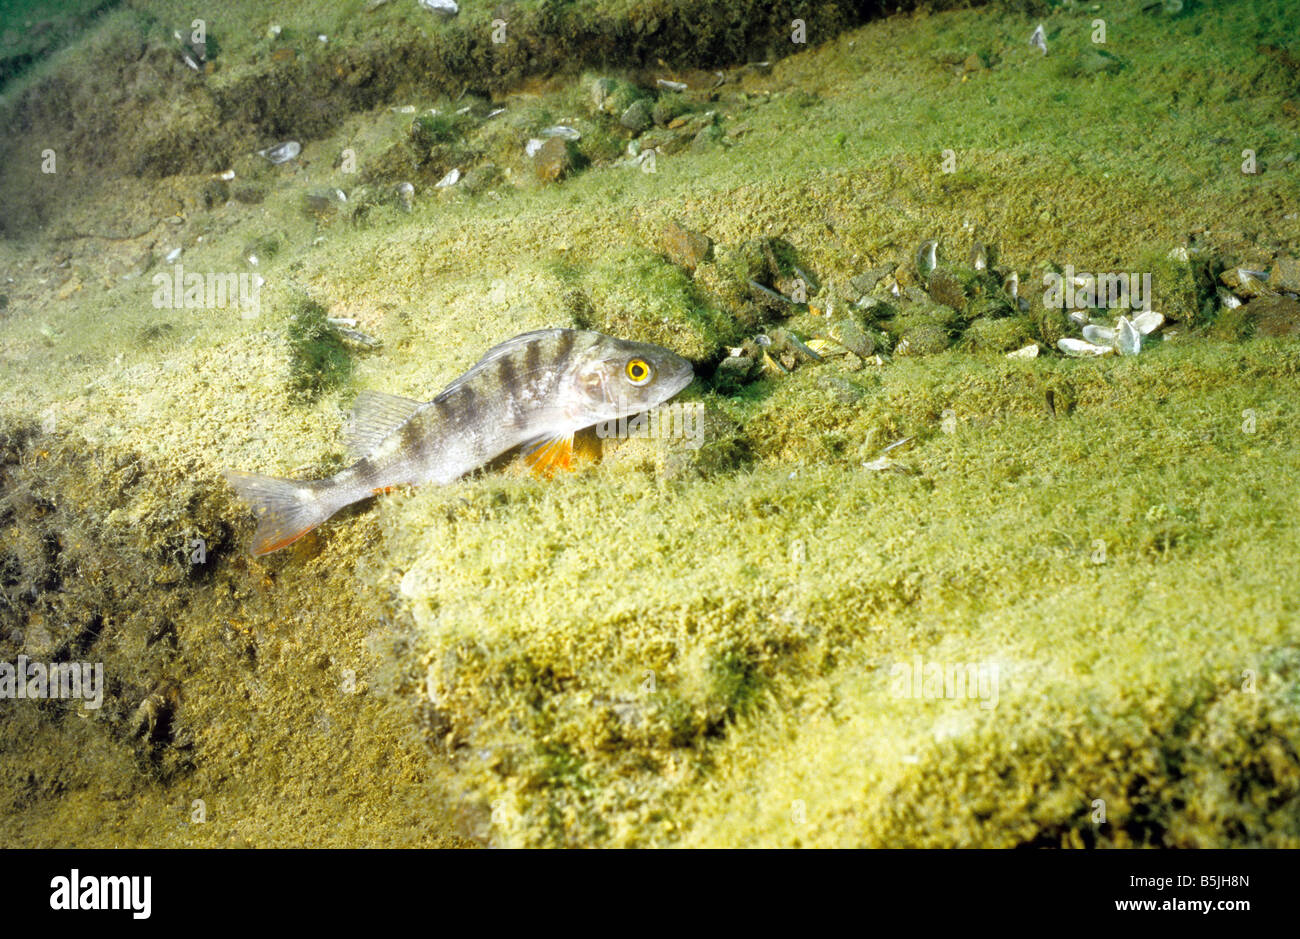 UK Freshwater fish. Perch, Perca Fluviatilis. Photographed in Stoney Cove, Leicestershire. England. Stock Photo